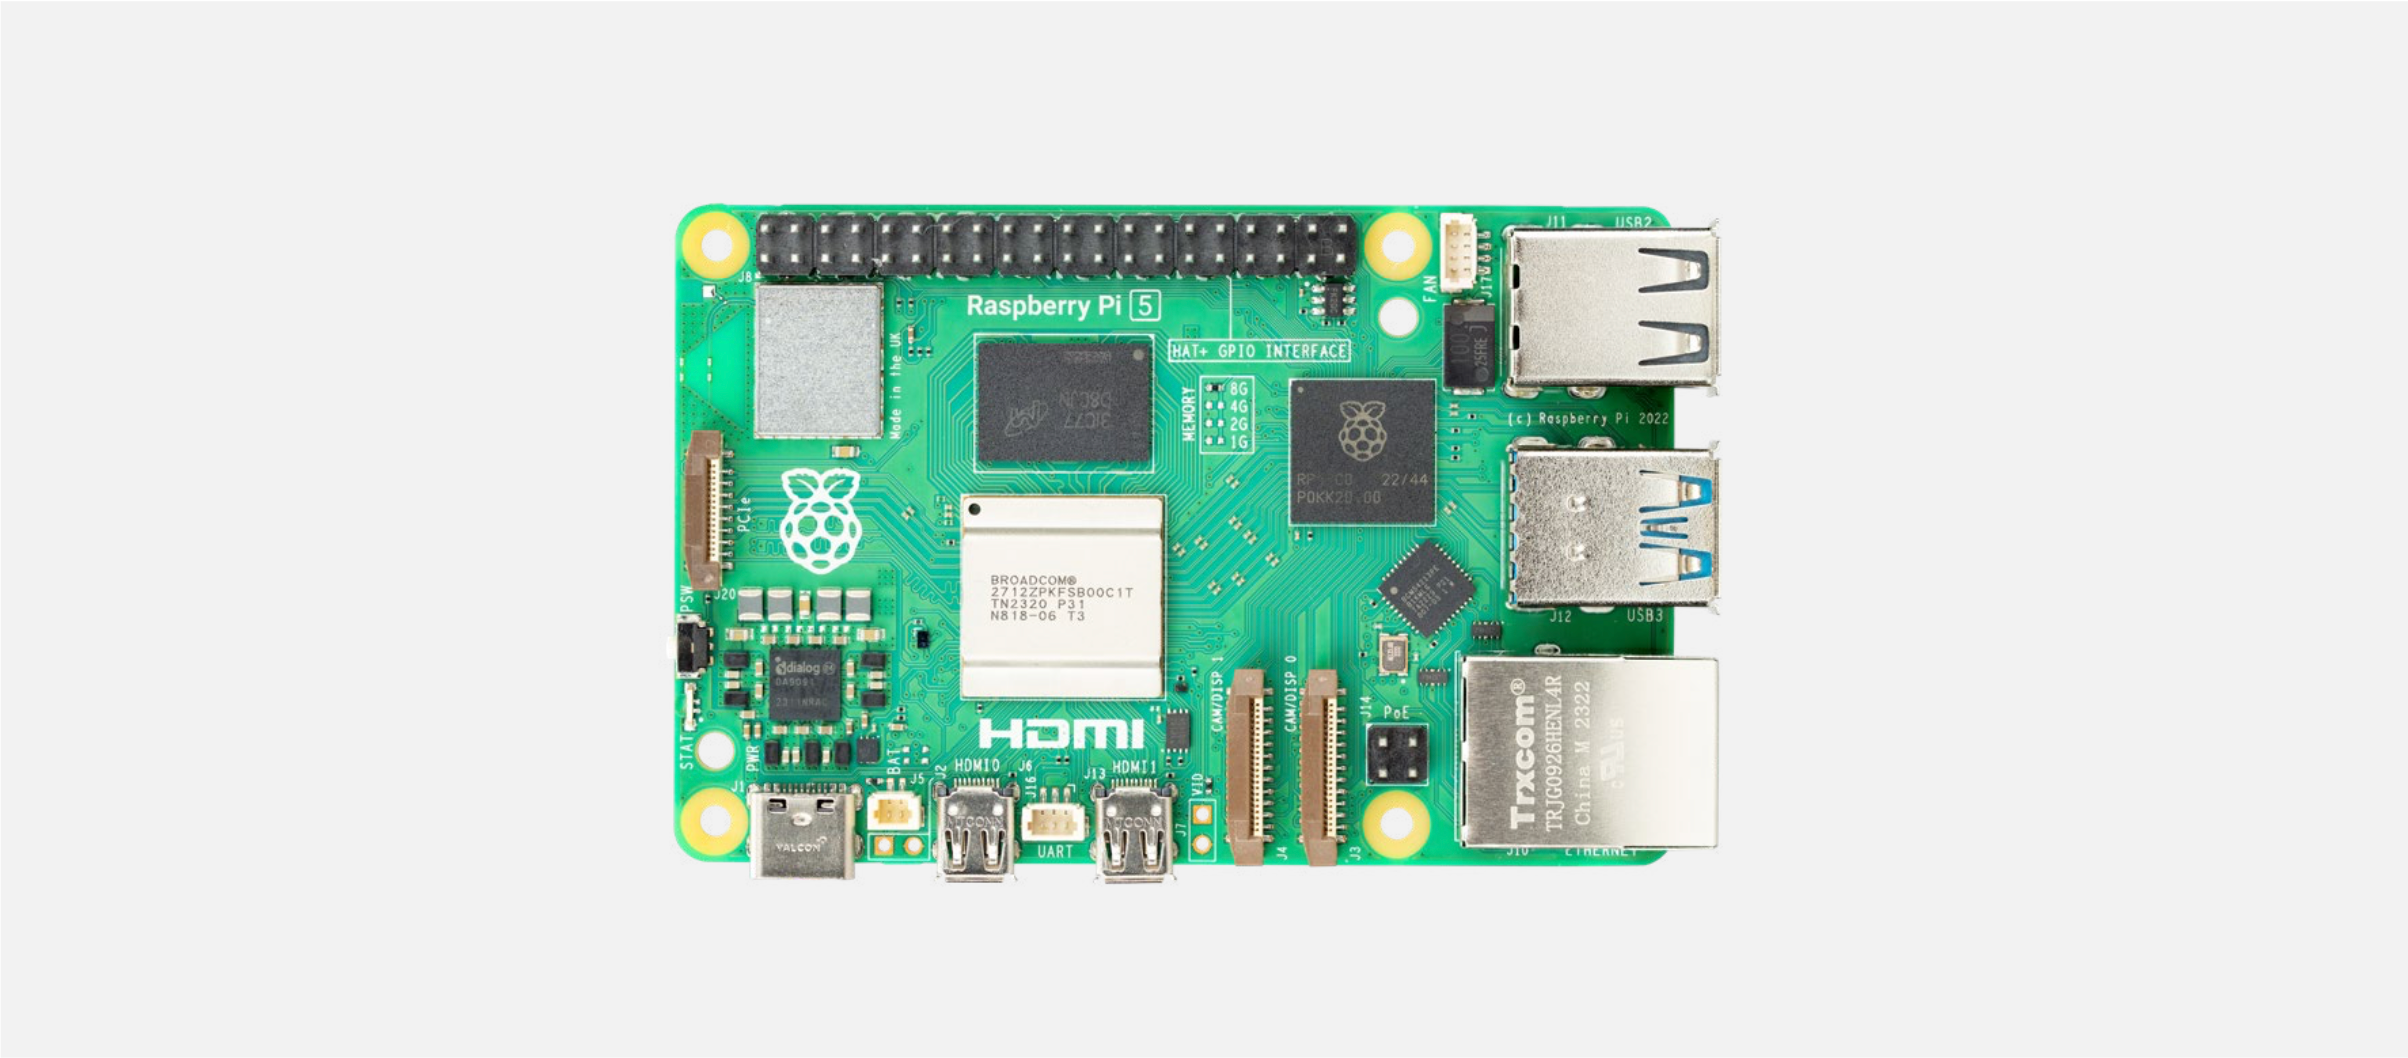 Introducing the Raspberry Pi 5: The Future of Compact Computing